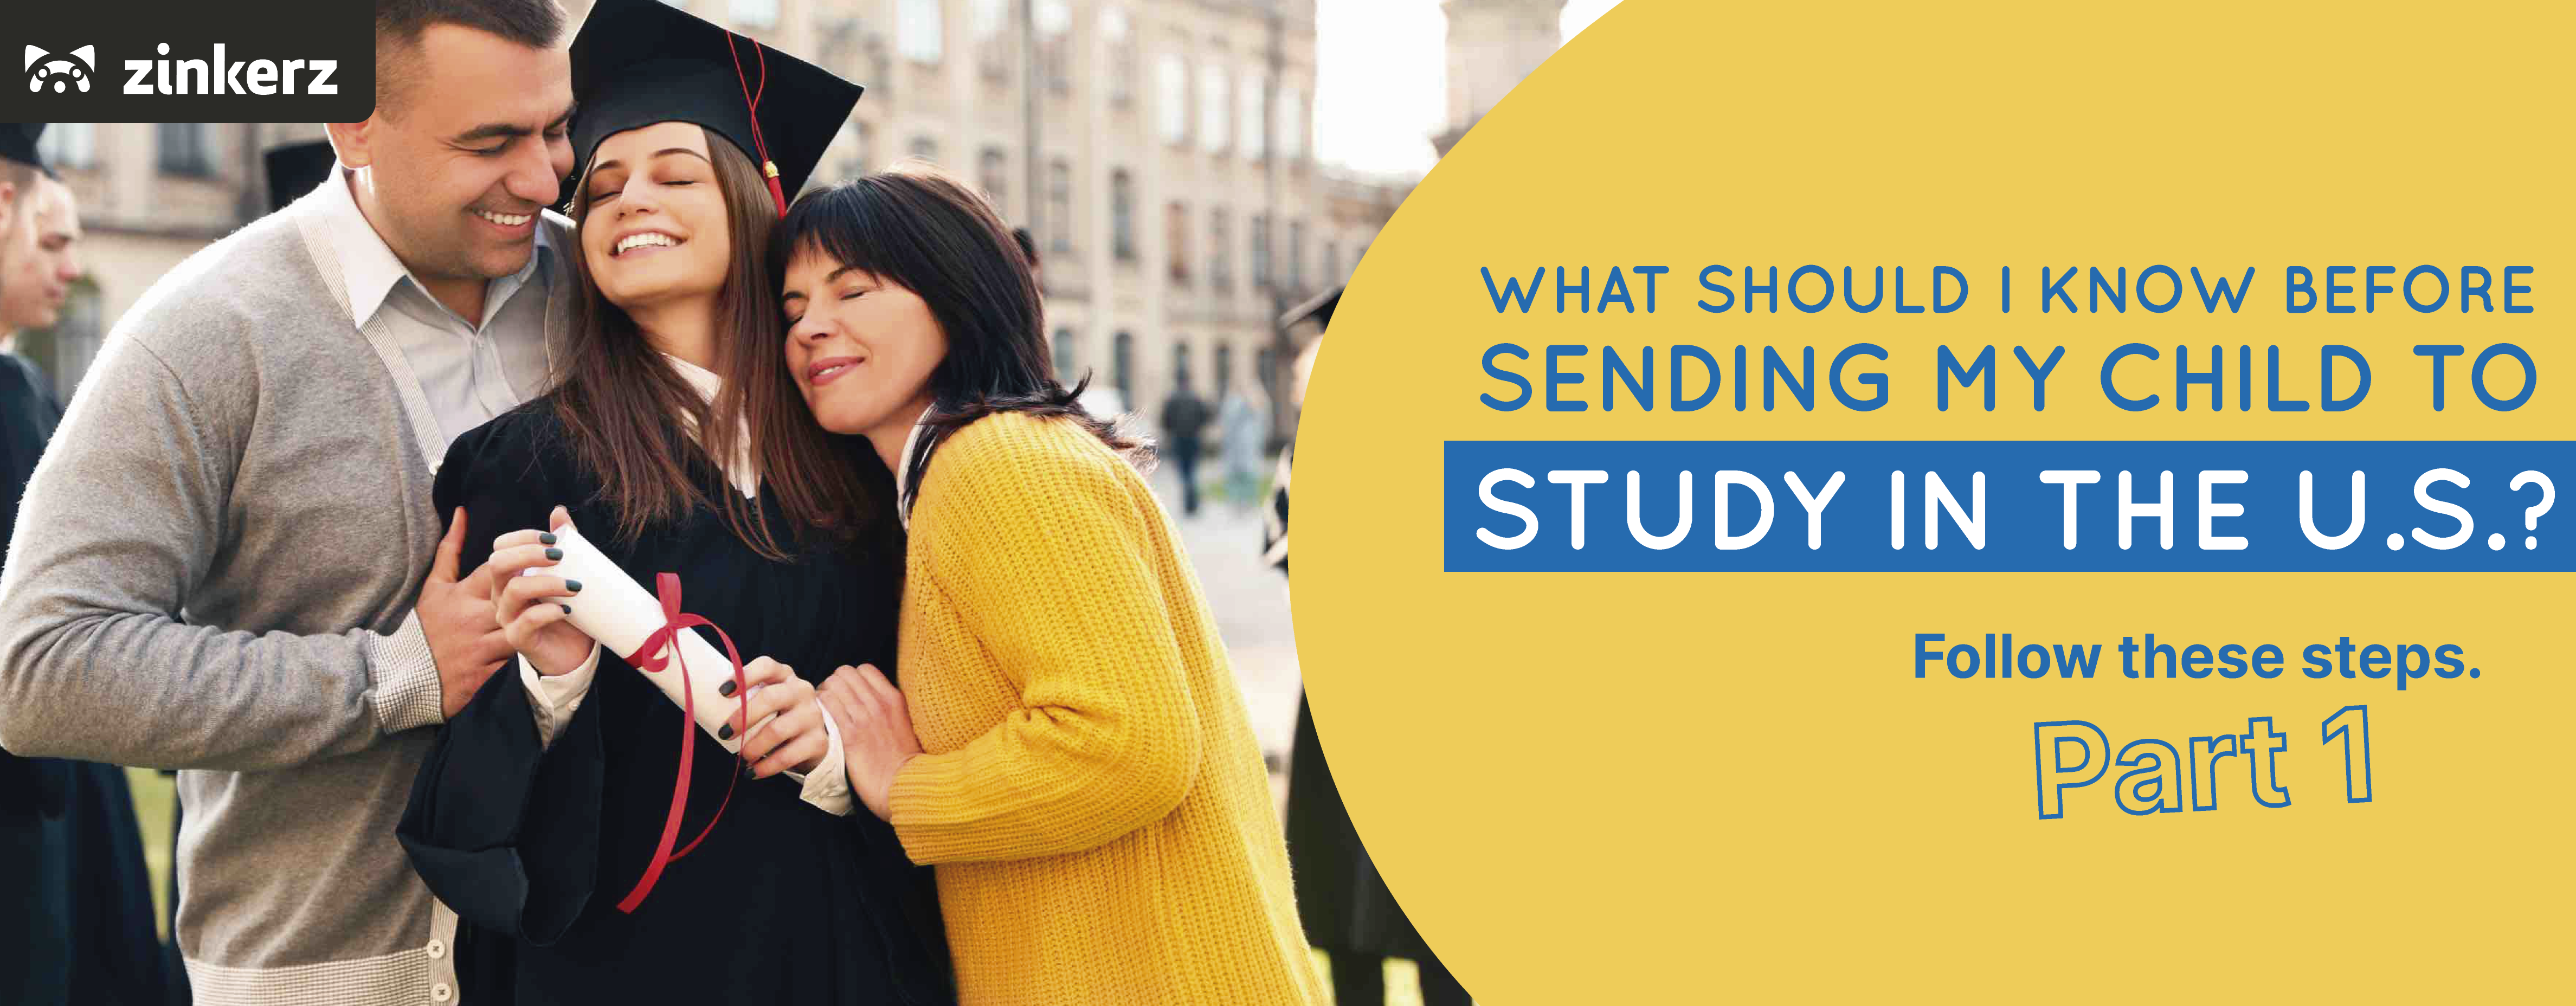 What Should I Know Before Sending My Child To Study In the U.S.? Part 1